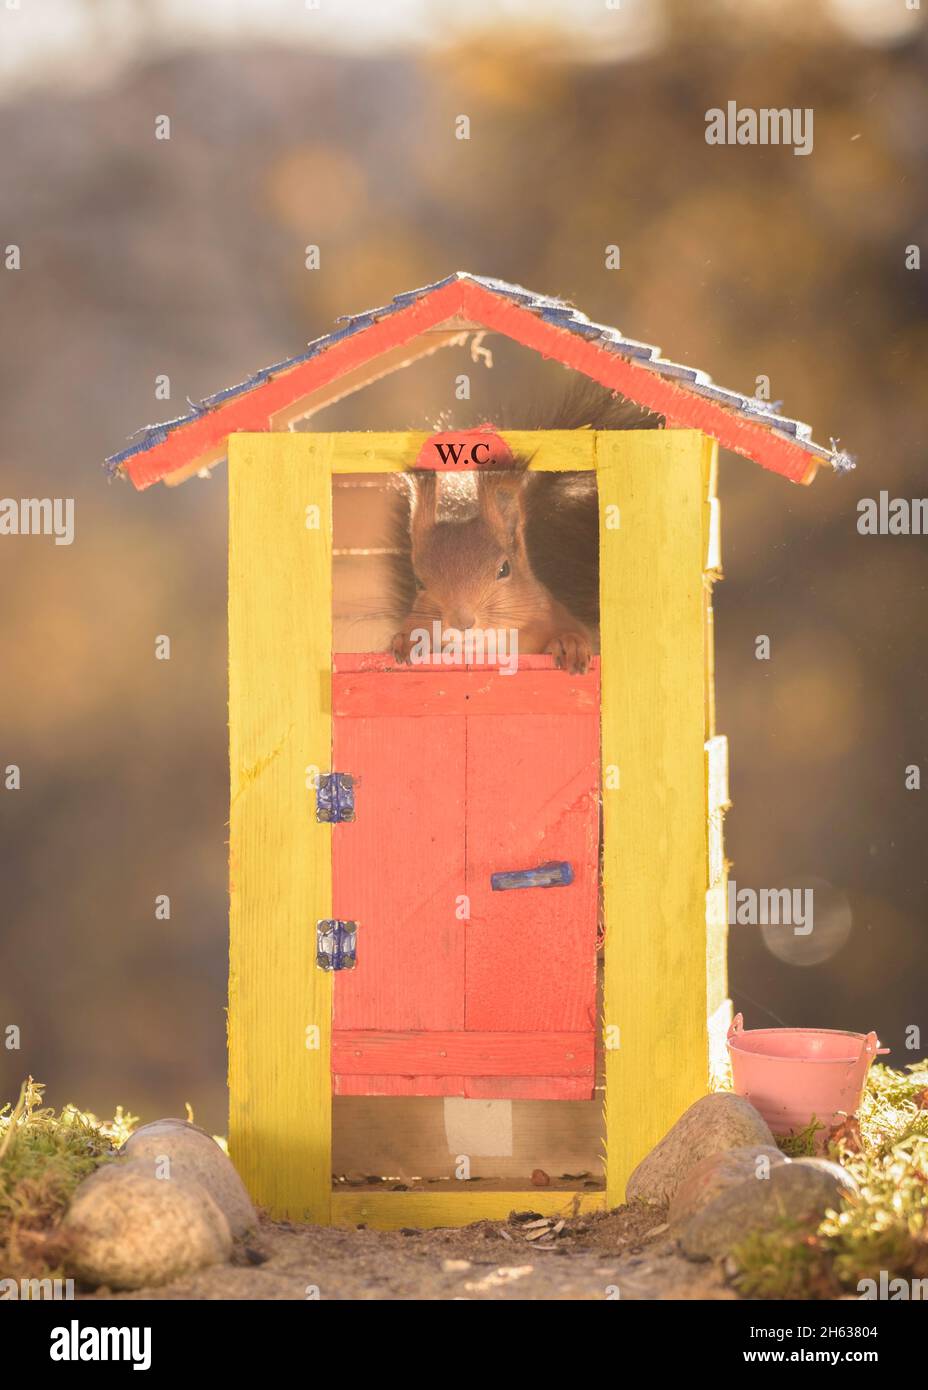 red squirrel is standing in an out house Stock Photo